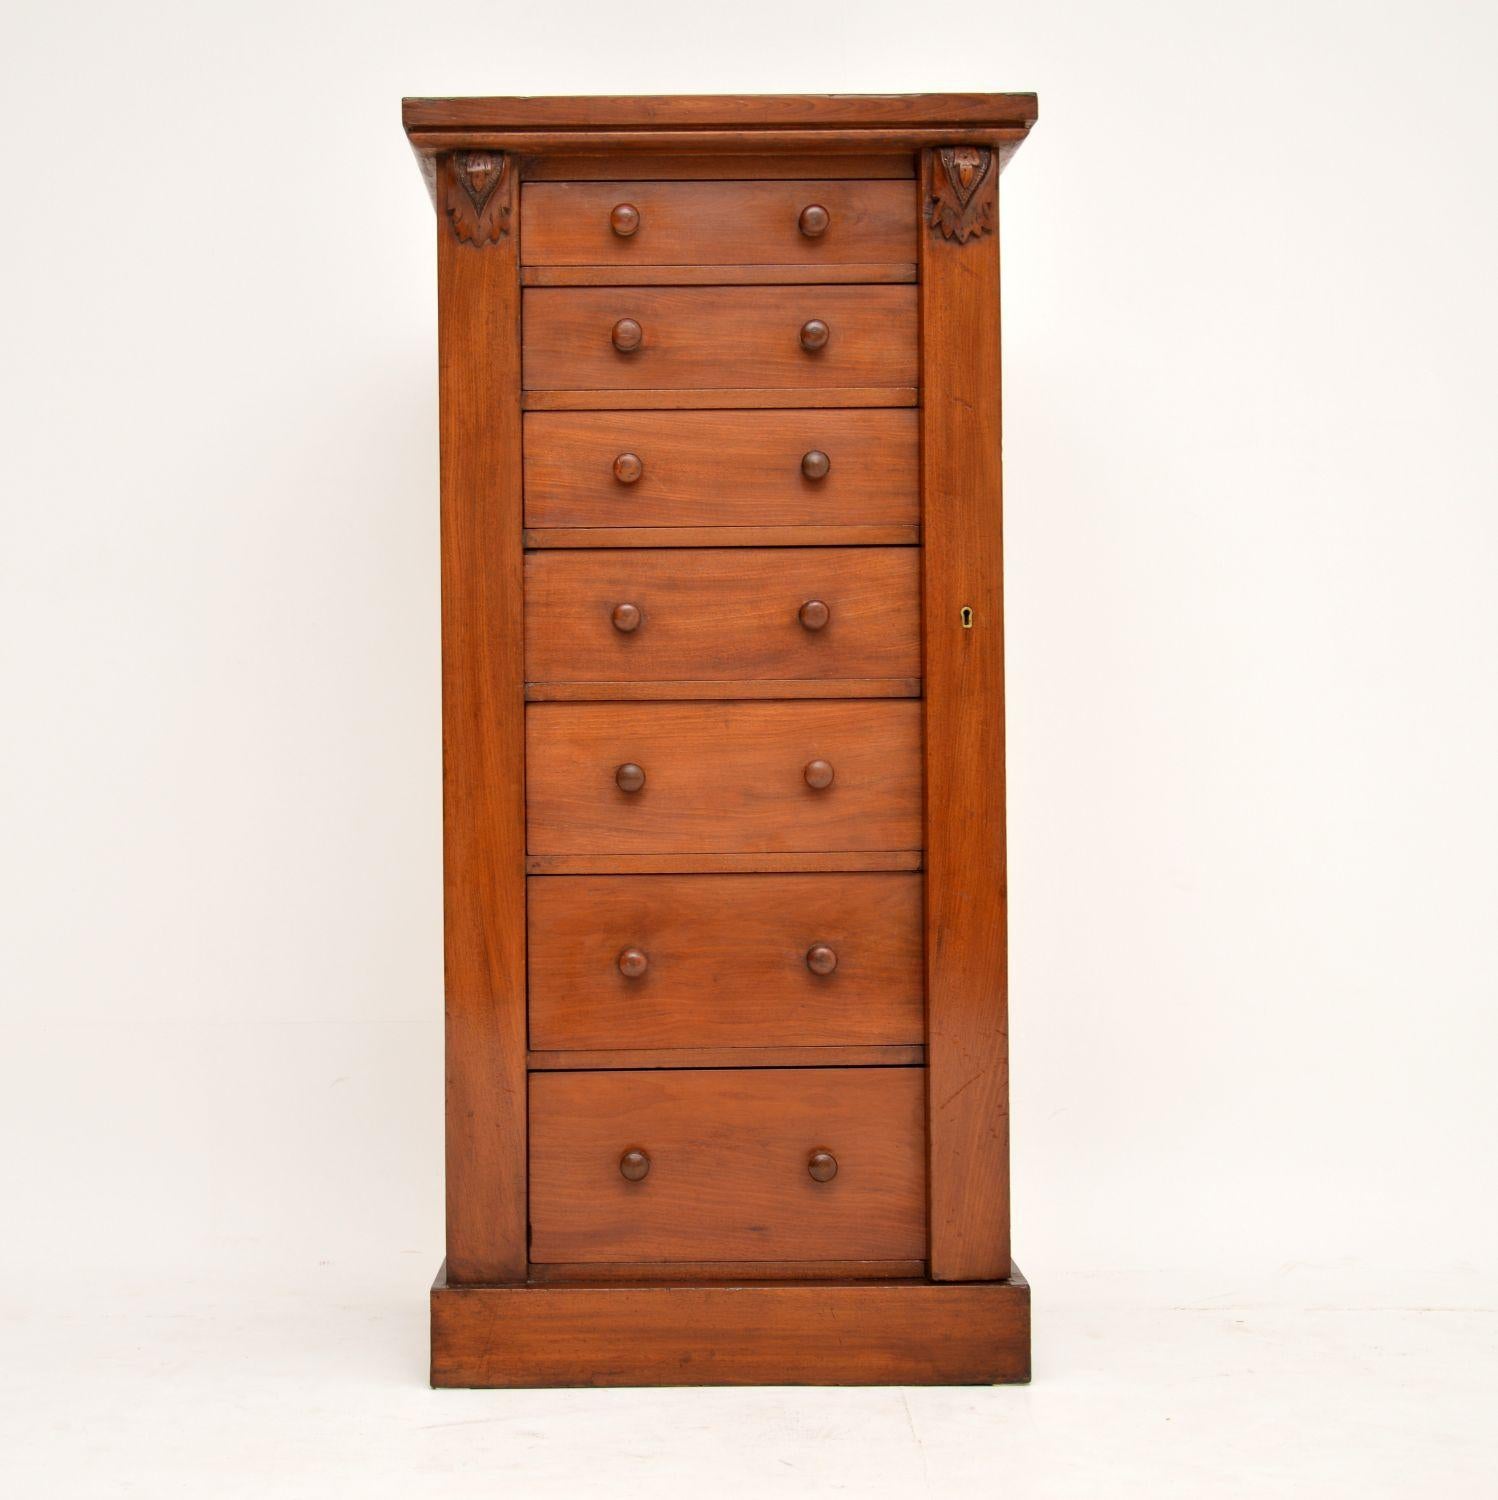 Antique Victorian mahogany Wellington chest of drawers in excellent condition & dating from the 1870-80’s period. Wellington chests always have seven drawers & a hinged bar on one side that locks them all into place. The drawers are all graduated in